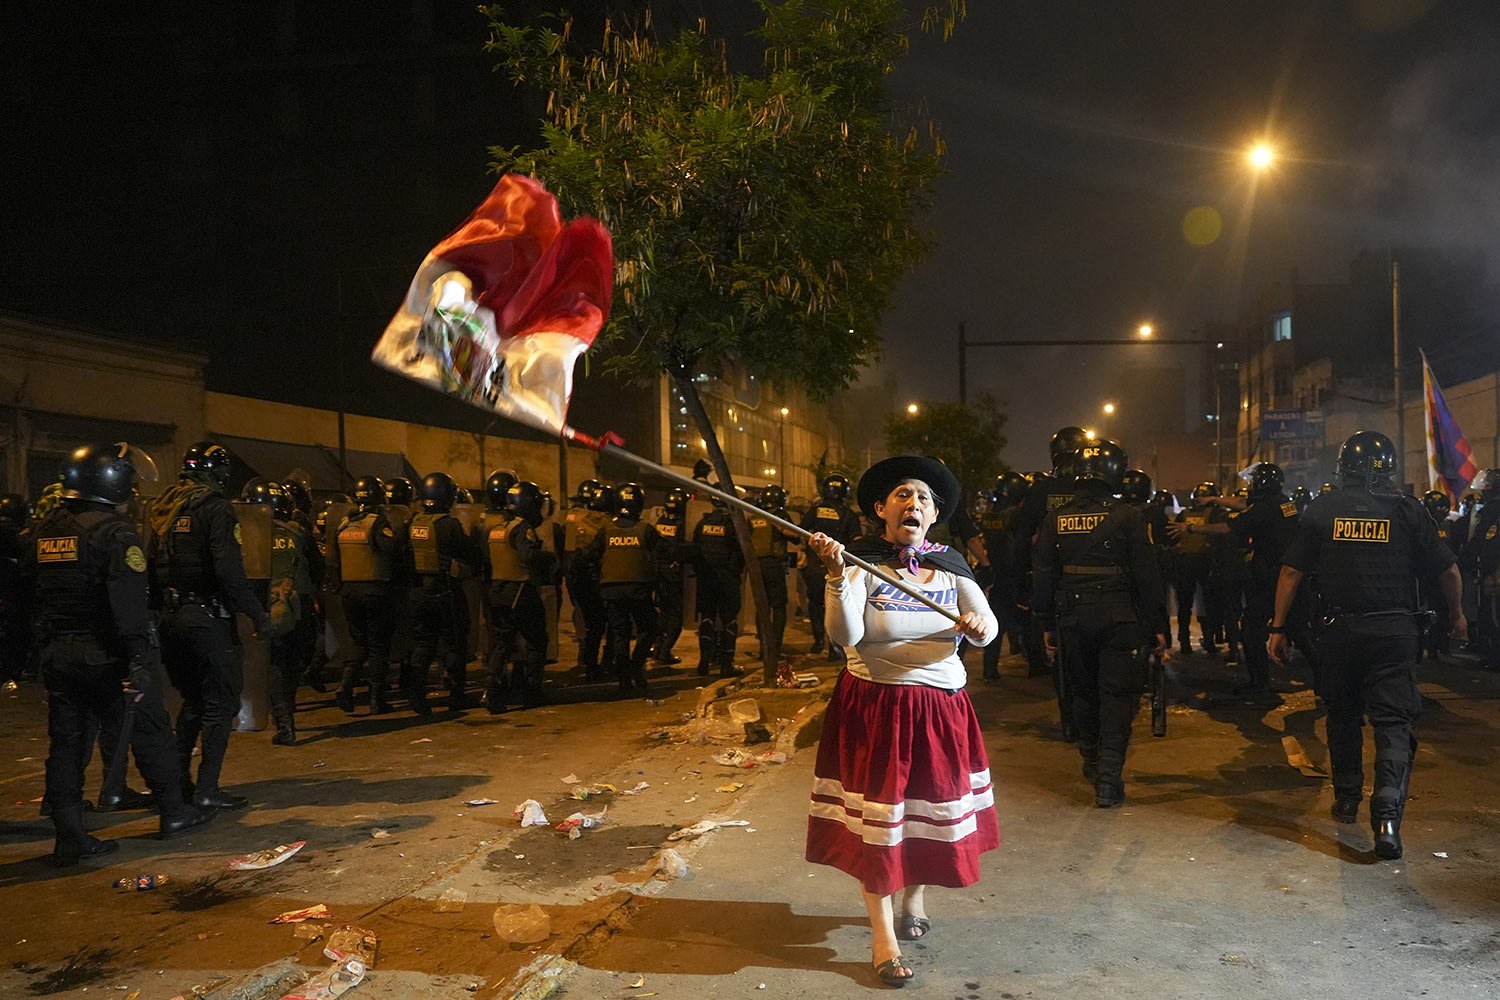  A woman waves a Peruvian flag during an anti-government protest in Lima, Peru, Jan. 20, 2023. Protesters are seeking the resignation of President Dina Boluarte, the release from prison of ousted President Pedro Castillo and immediate elections. (AP 